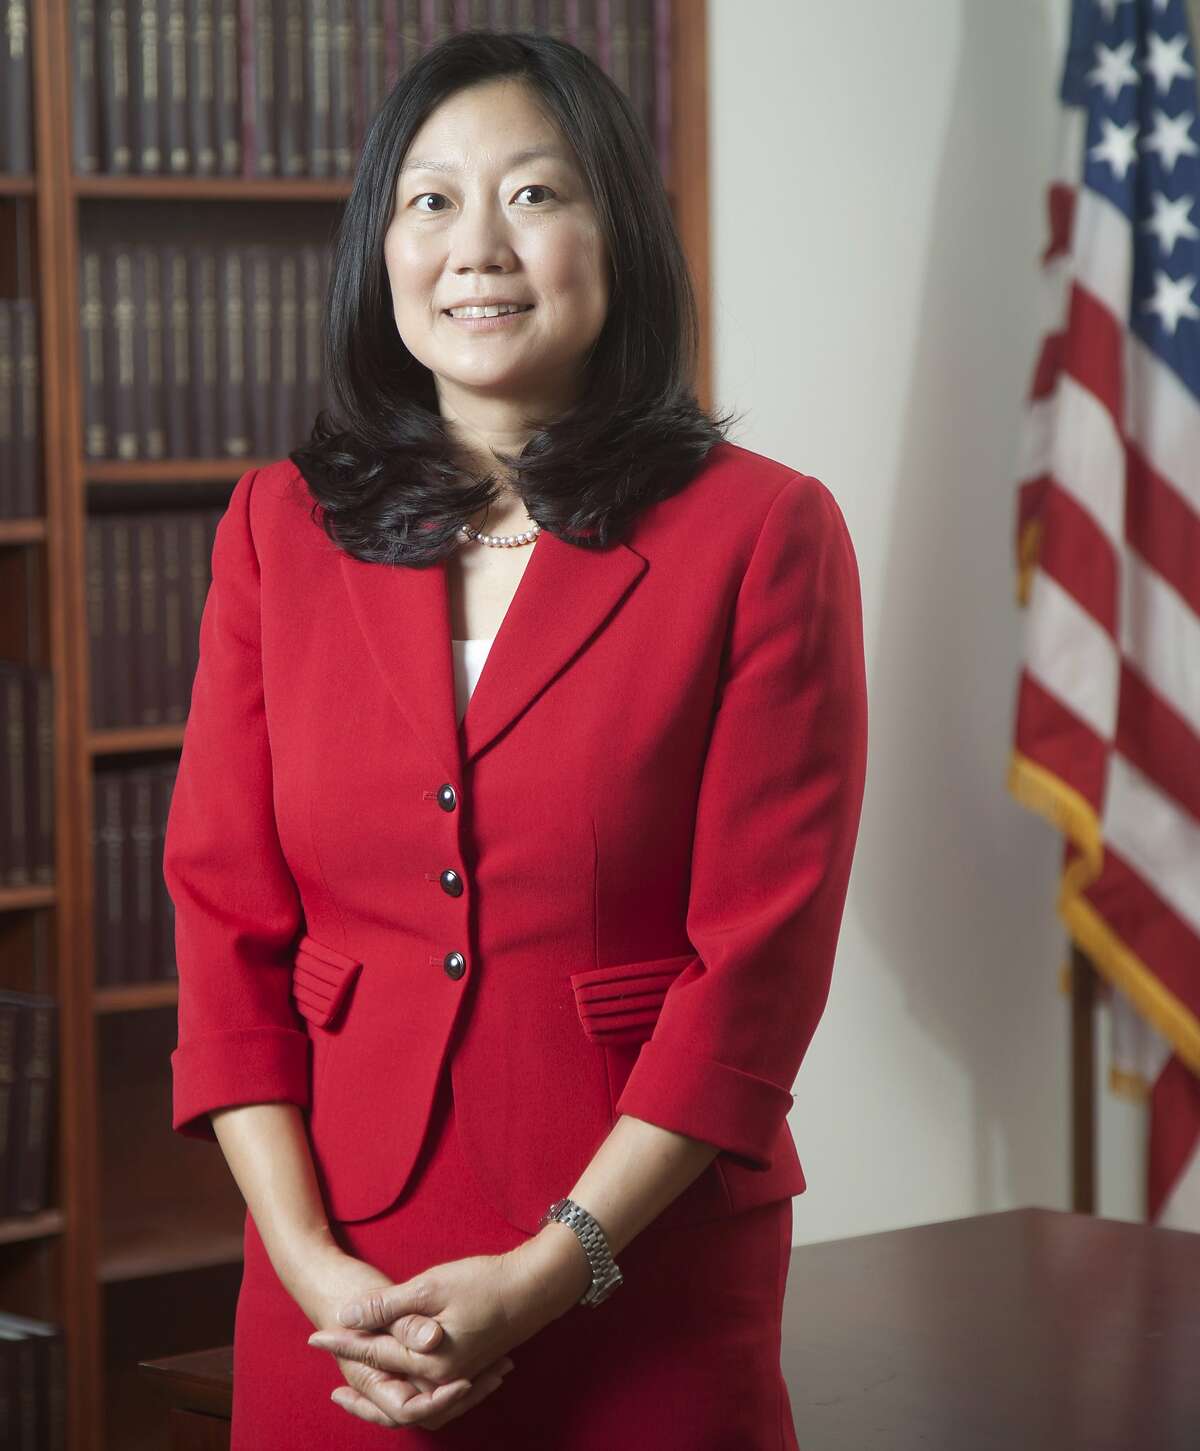 U.S. District Judge Lucy Koh had ordered the U.S. Census Bureau to keep counting until Oct. 31.